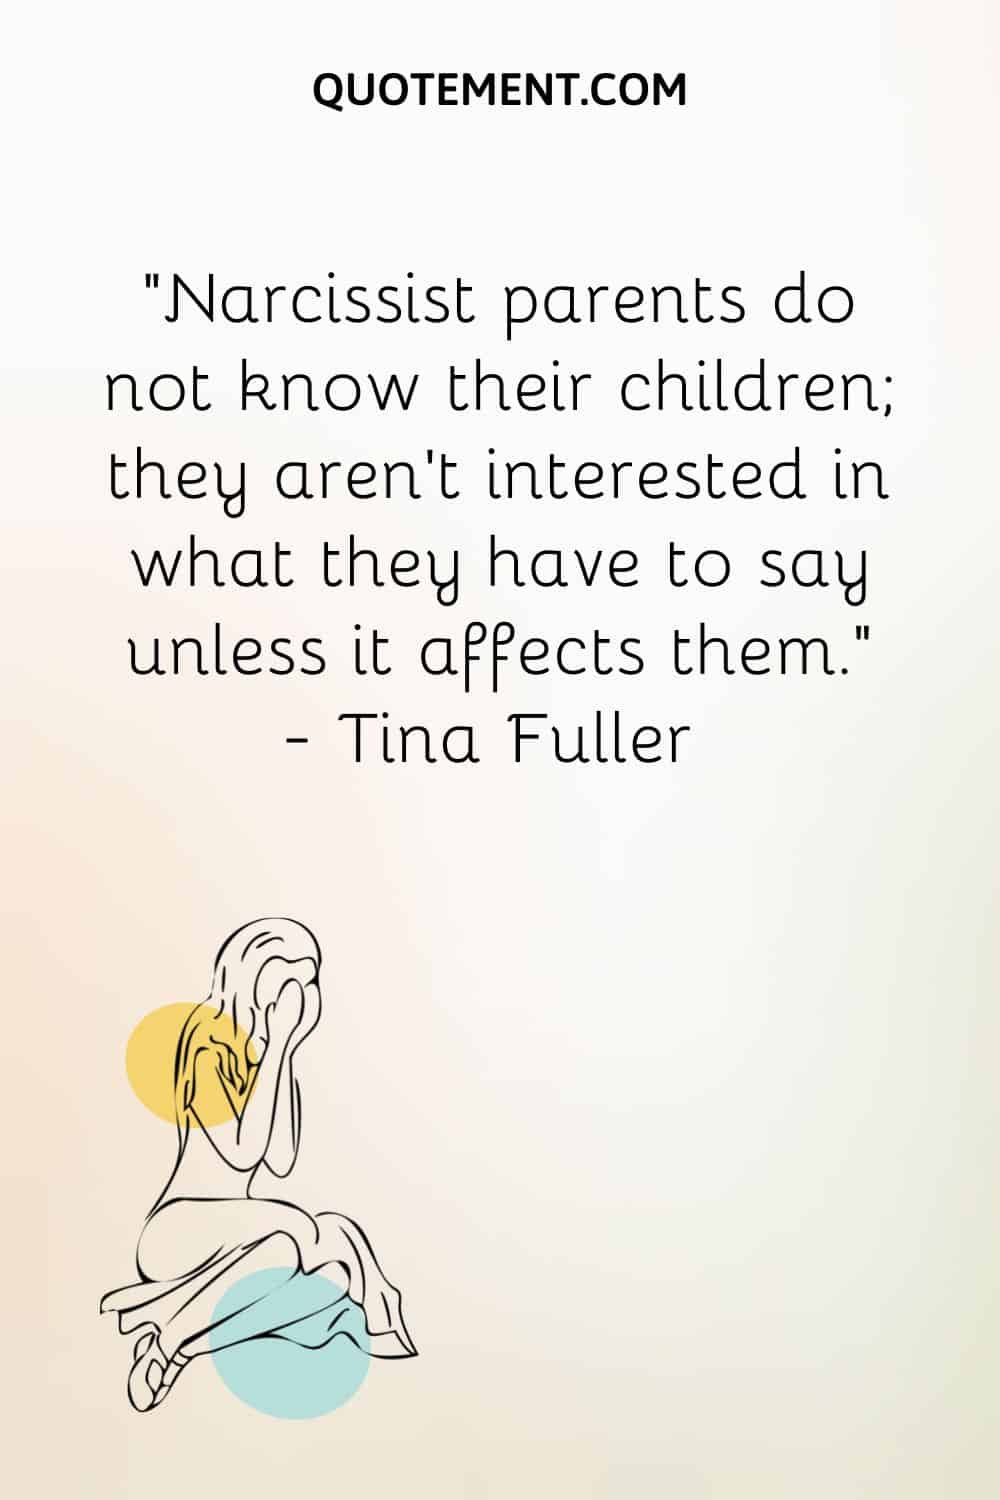 illustration of a girl crying representing narcissist parent quote